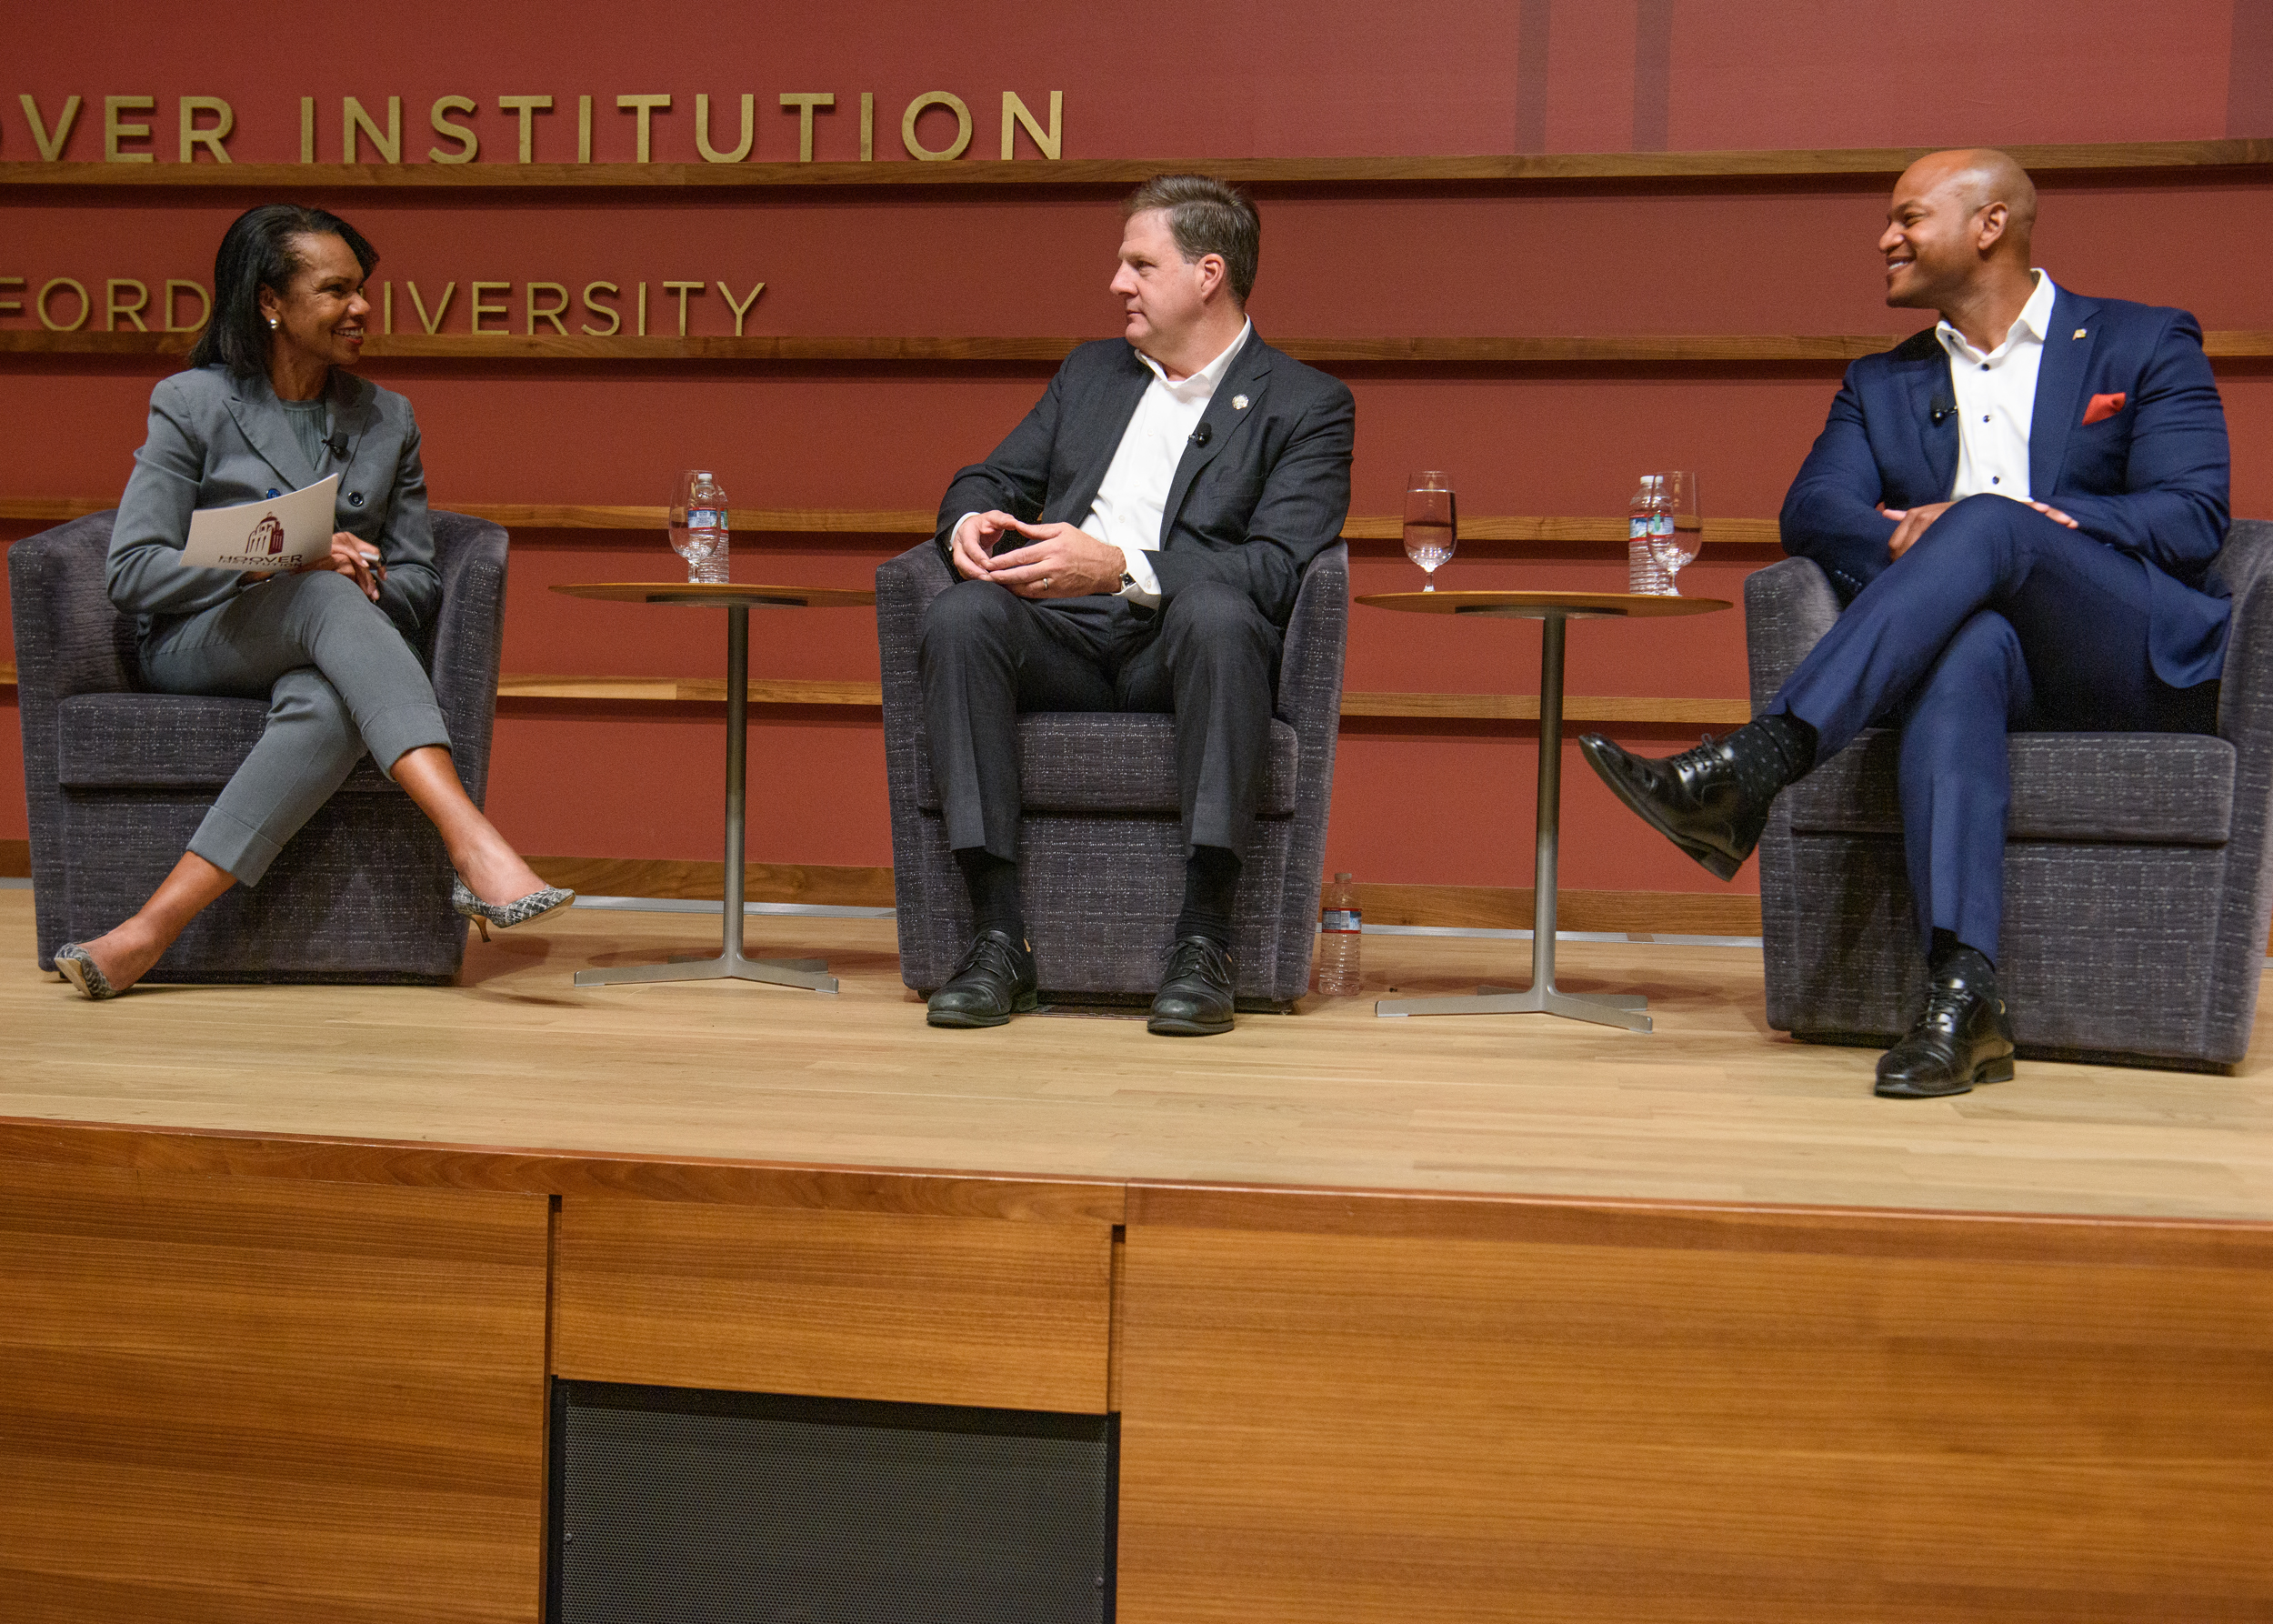 Conversation on governing in a polarized era. Left to right: Condoleezza Rice, Governor Chris Sununu (New Hampshire), and Governor Wes Moore (Massachusetts) (Patrick Beaudoin, 2023).